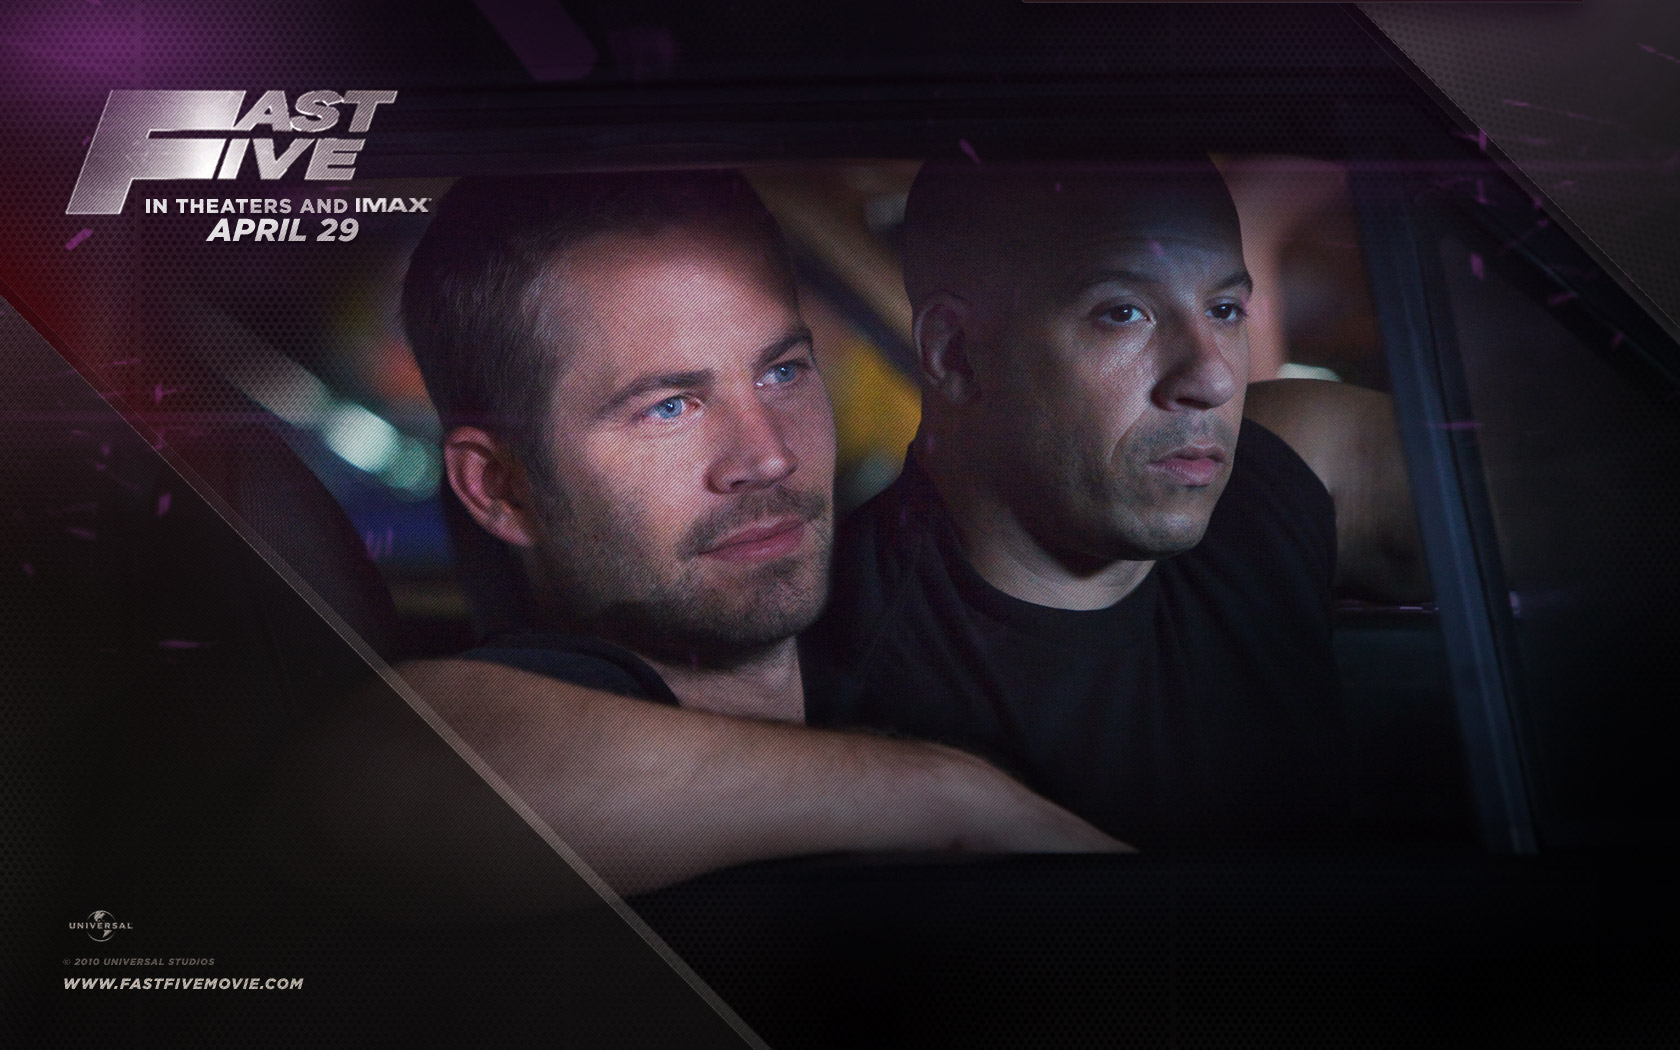 Fast Five Wallpapers 1680x1050   Movie Wallpapers 1680x1050